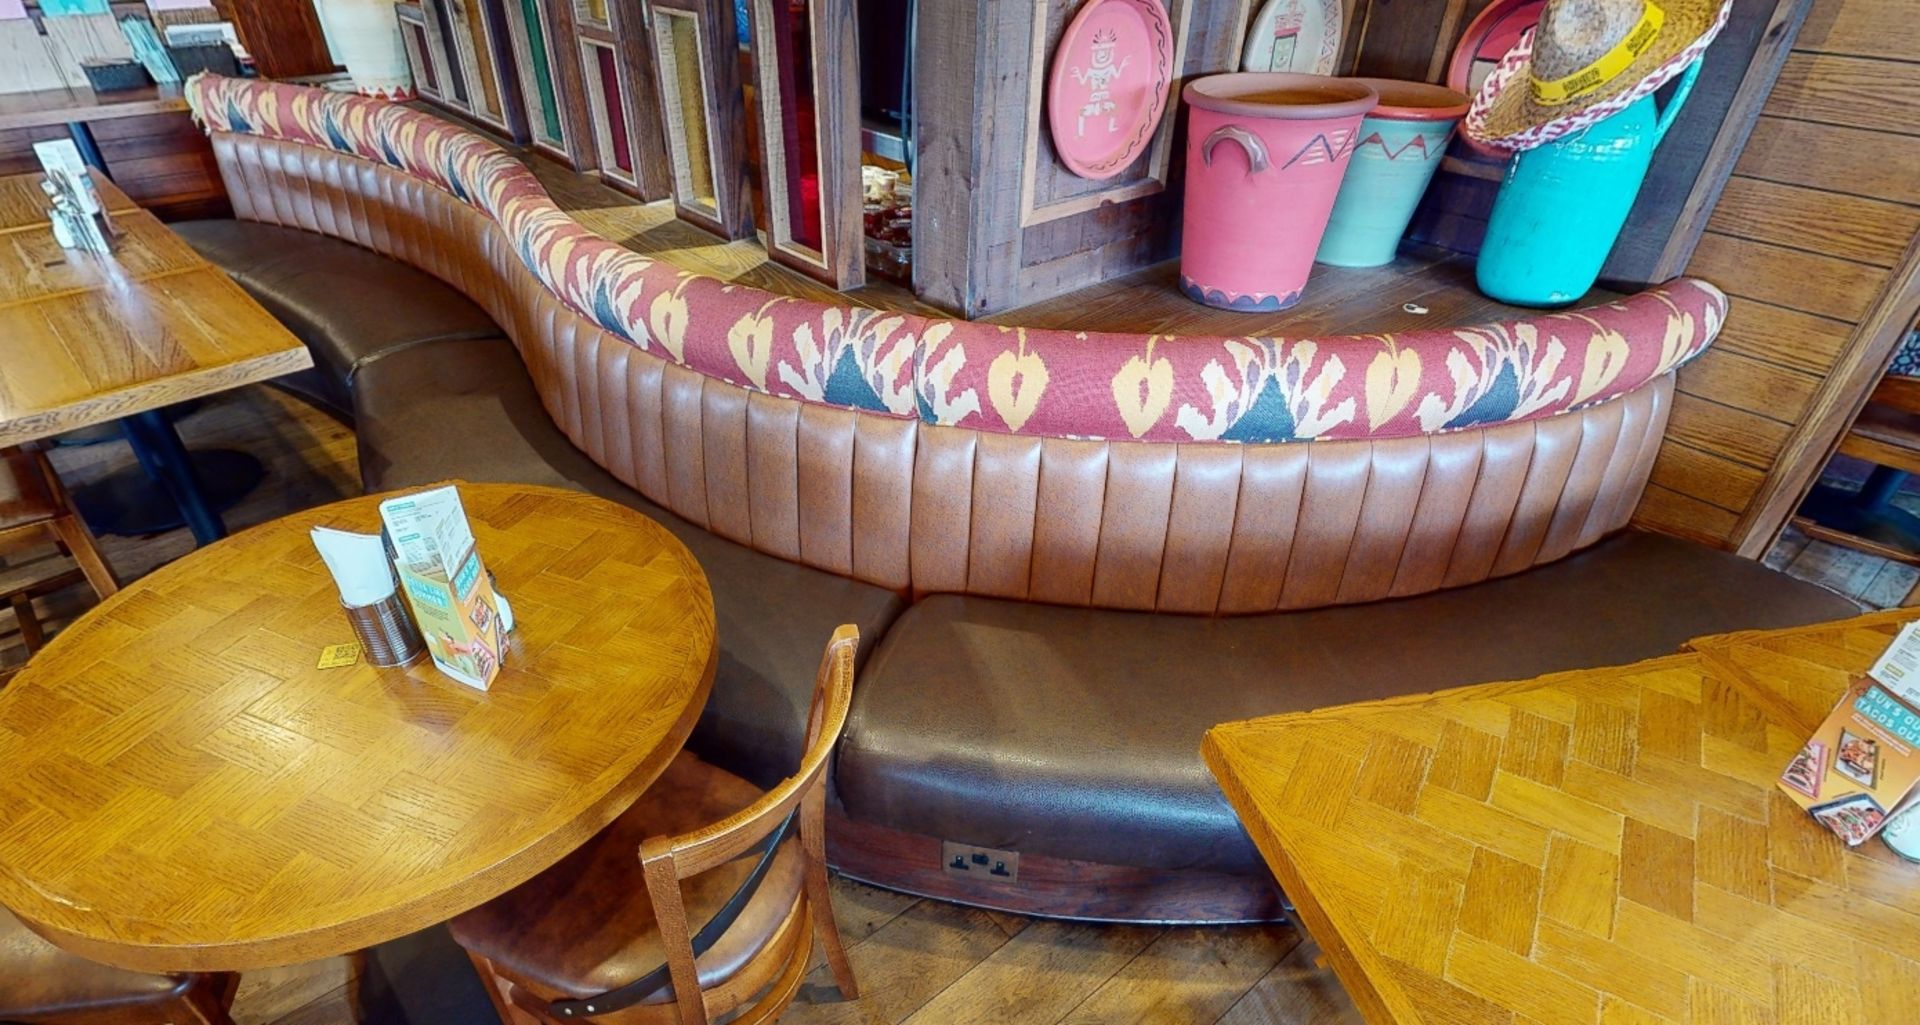 1 x Restaurant Curved Long Seating Bench - Features Brown Faux Leather Seat Pads and Light Brown - Image 3 of 7